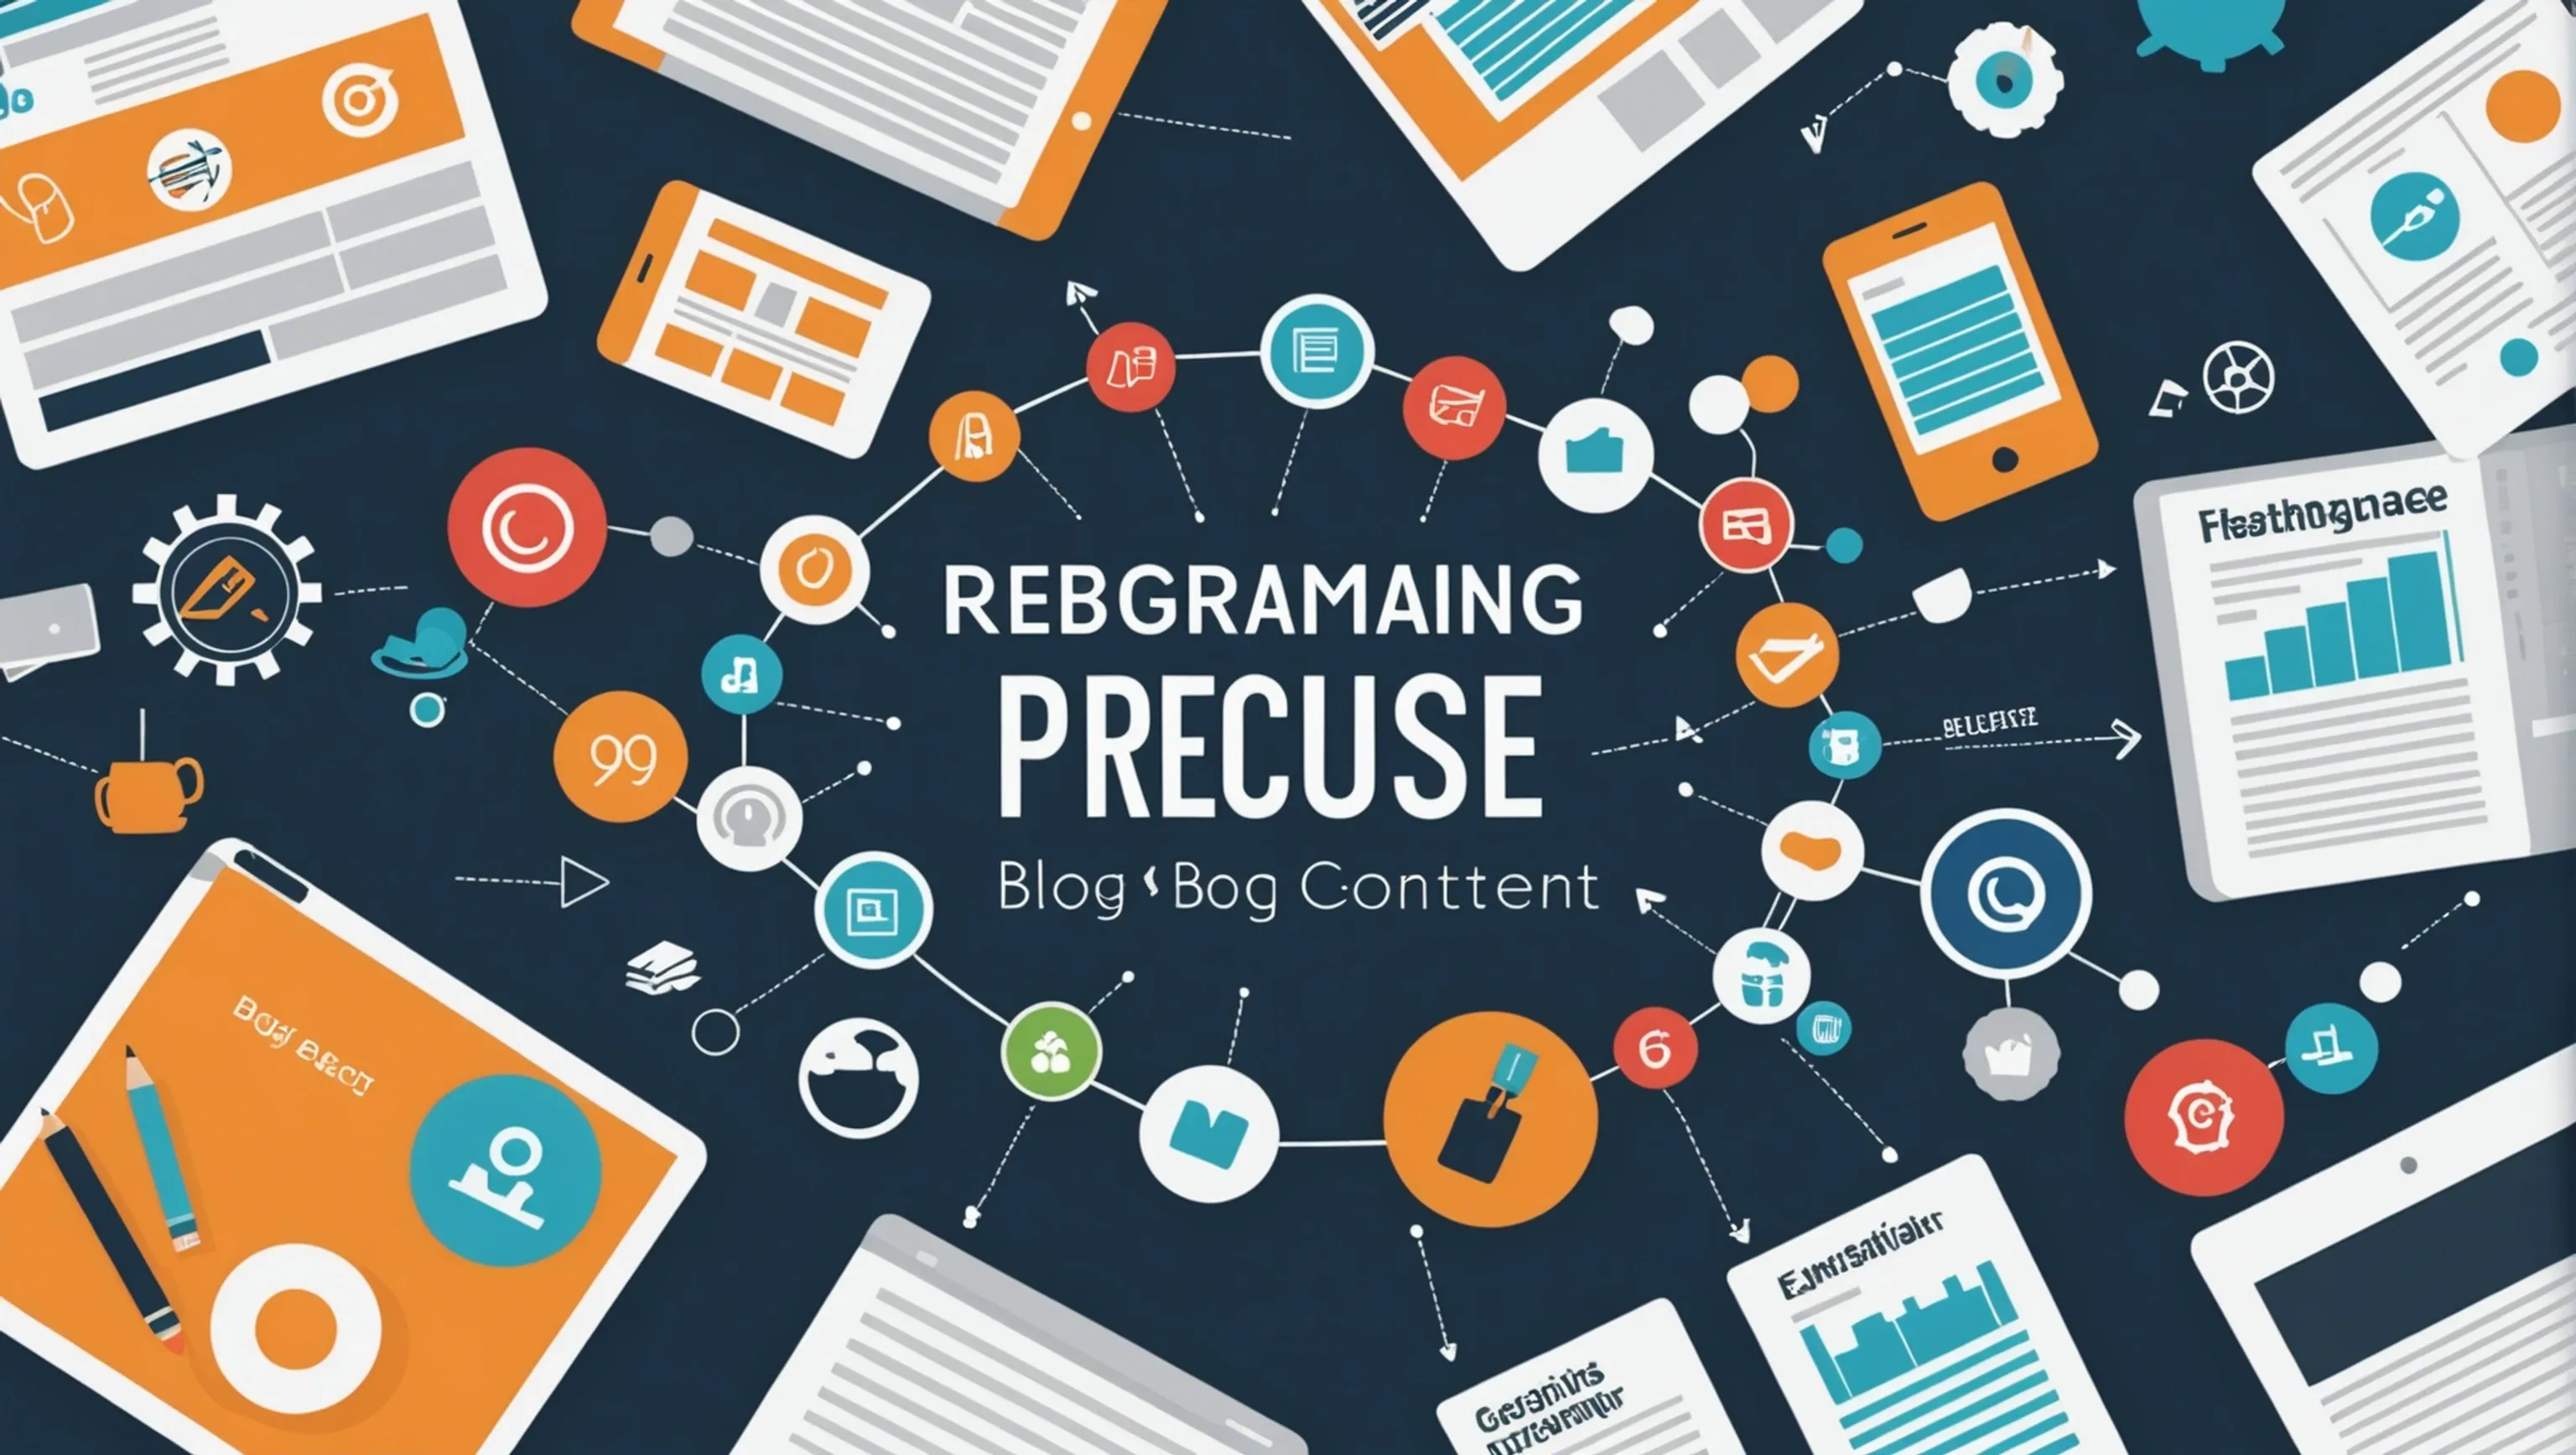 Different Ways to Reimagine and Reuse Blog Content